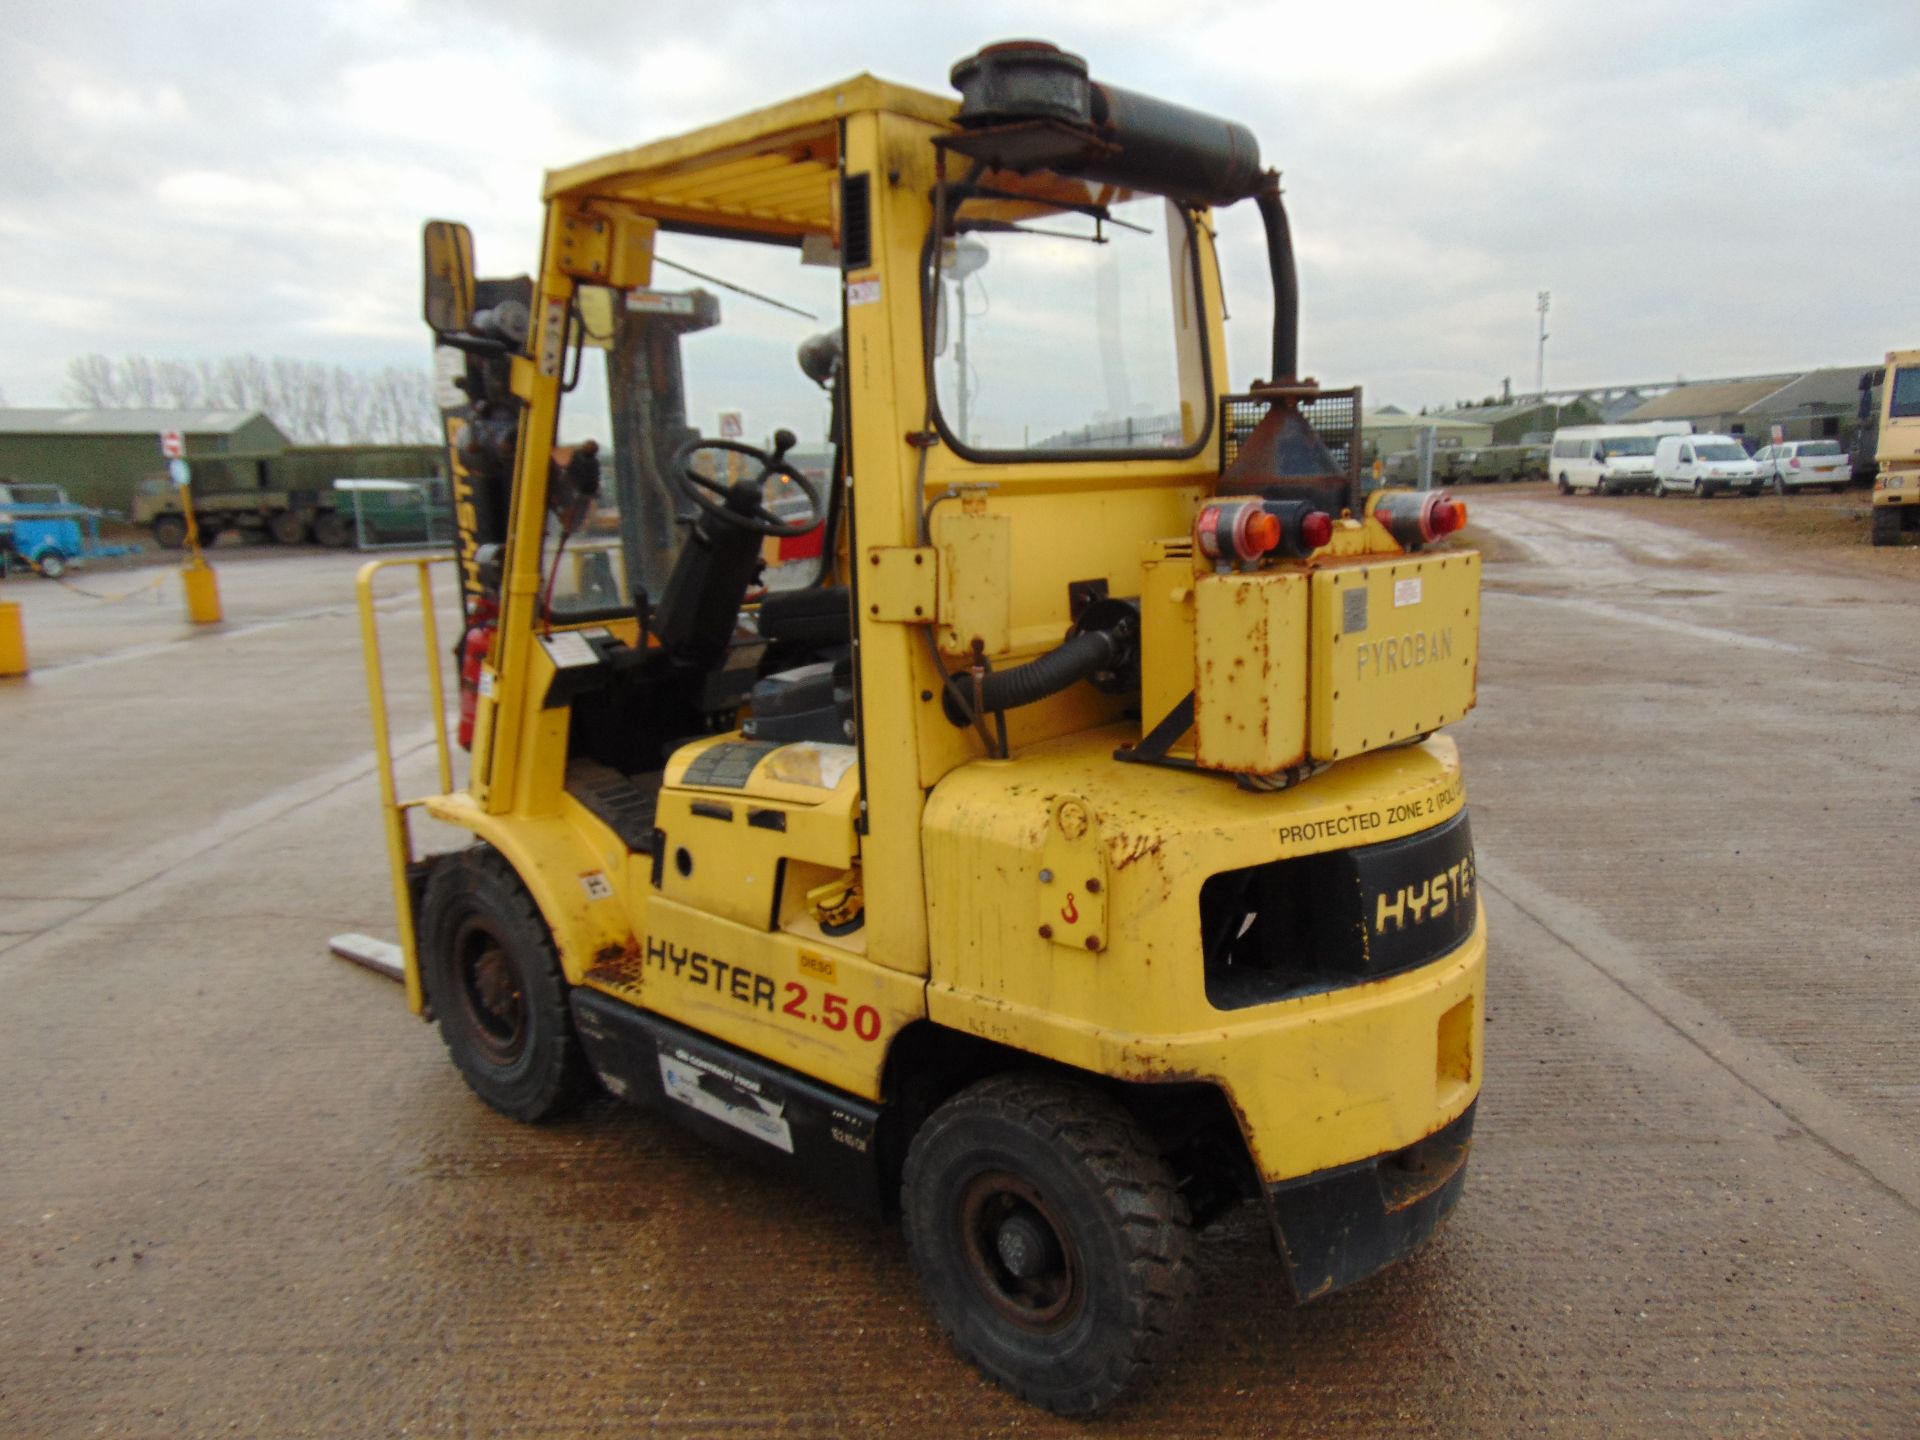 Hyster 2.50 Class C, Zone 2 Protected Diesel Forklift - Image 5 of 25